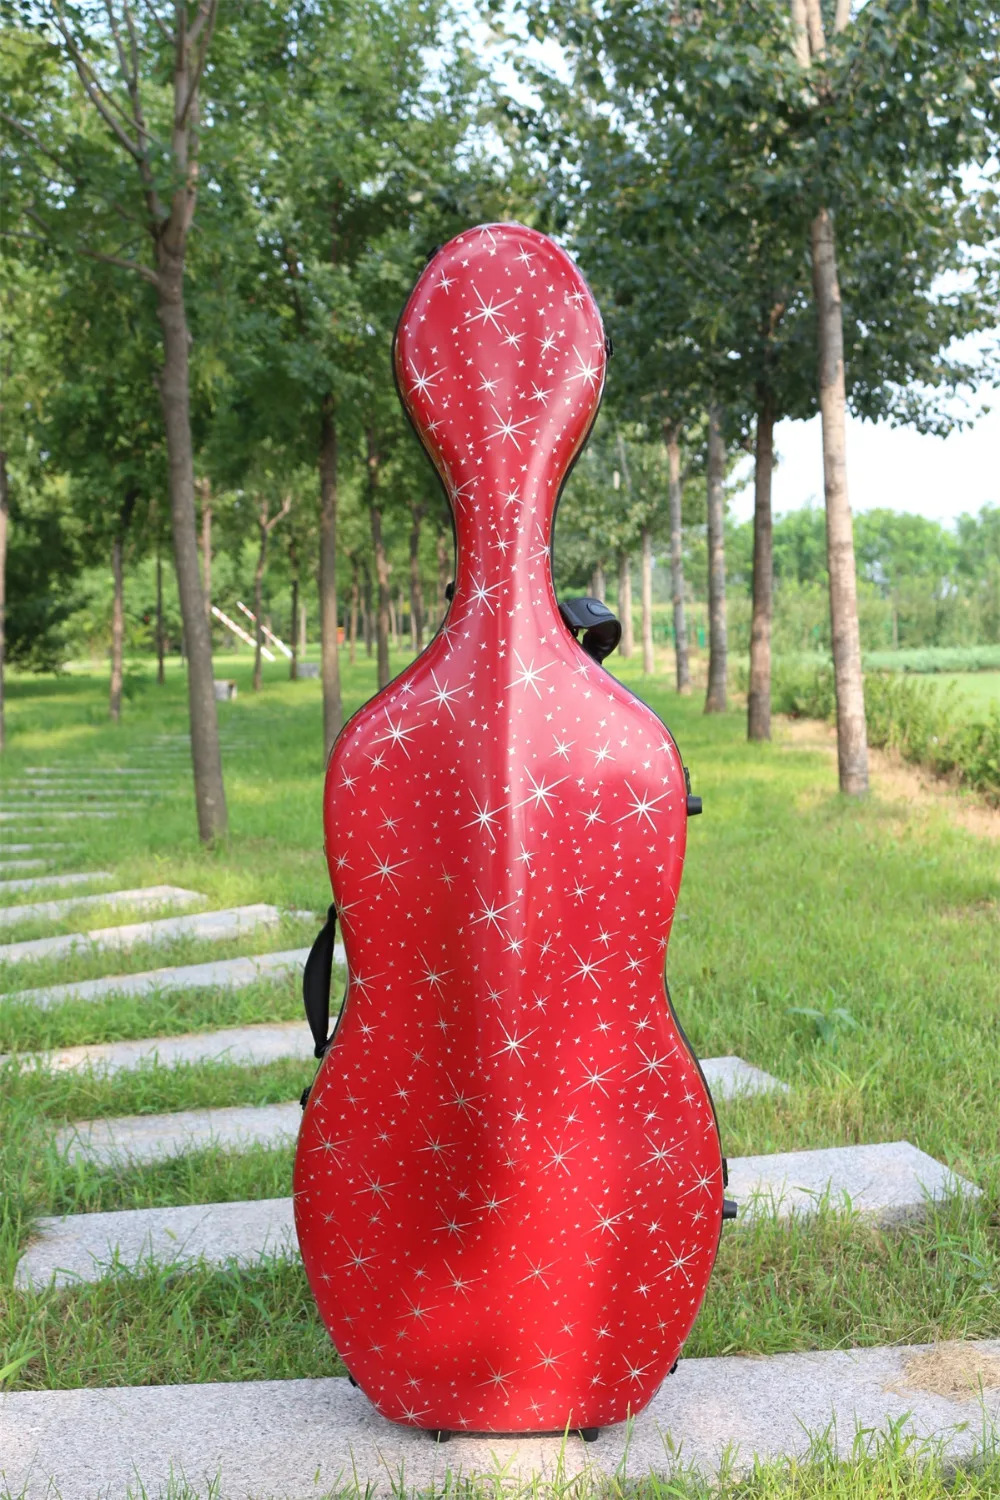 

red cello case 4/4 carbon fiber composite material 3.6kg with wheel